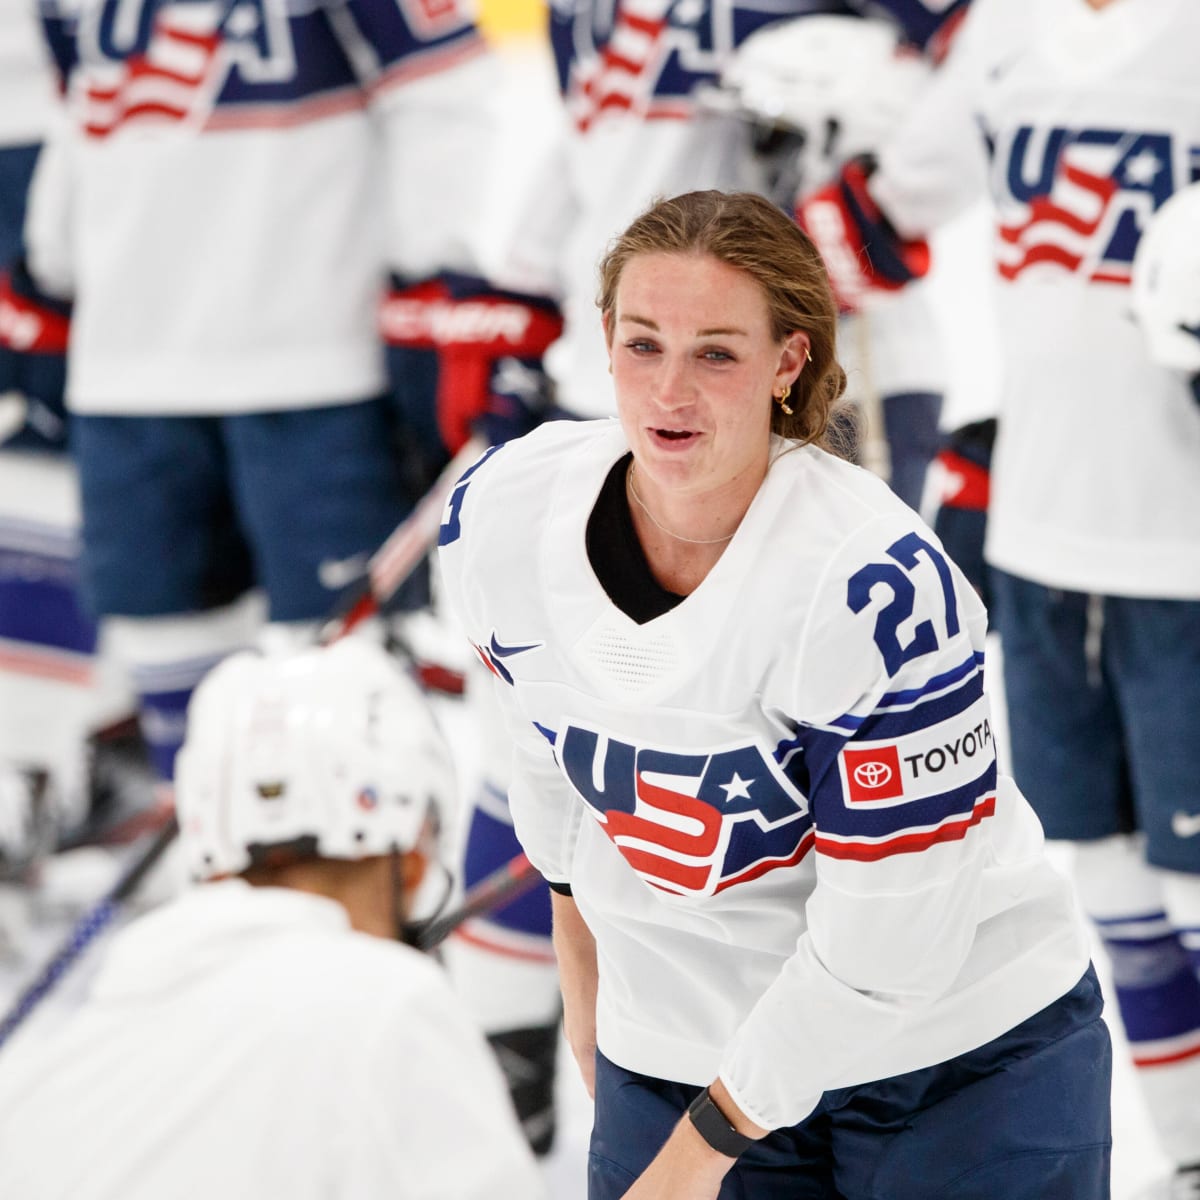 USA at Canada Free Live Stream Womens Hockey Online, Channel - How to Watch and Stream Major League and College Sports